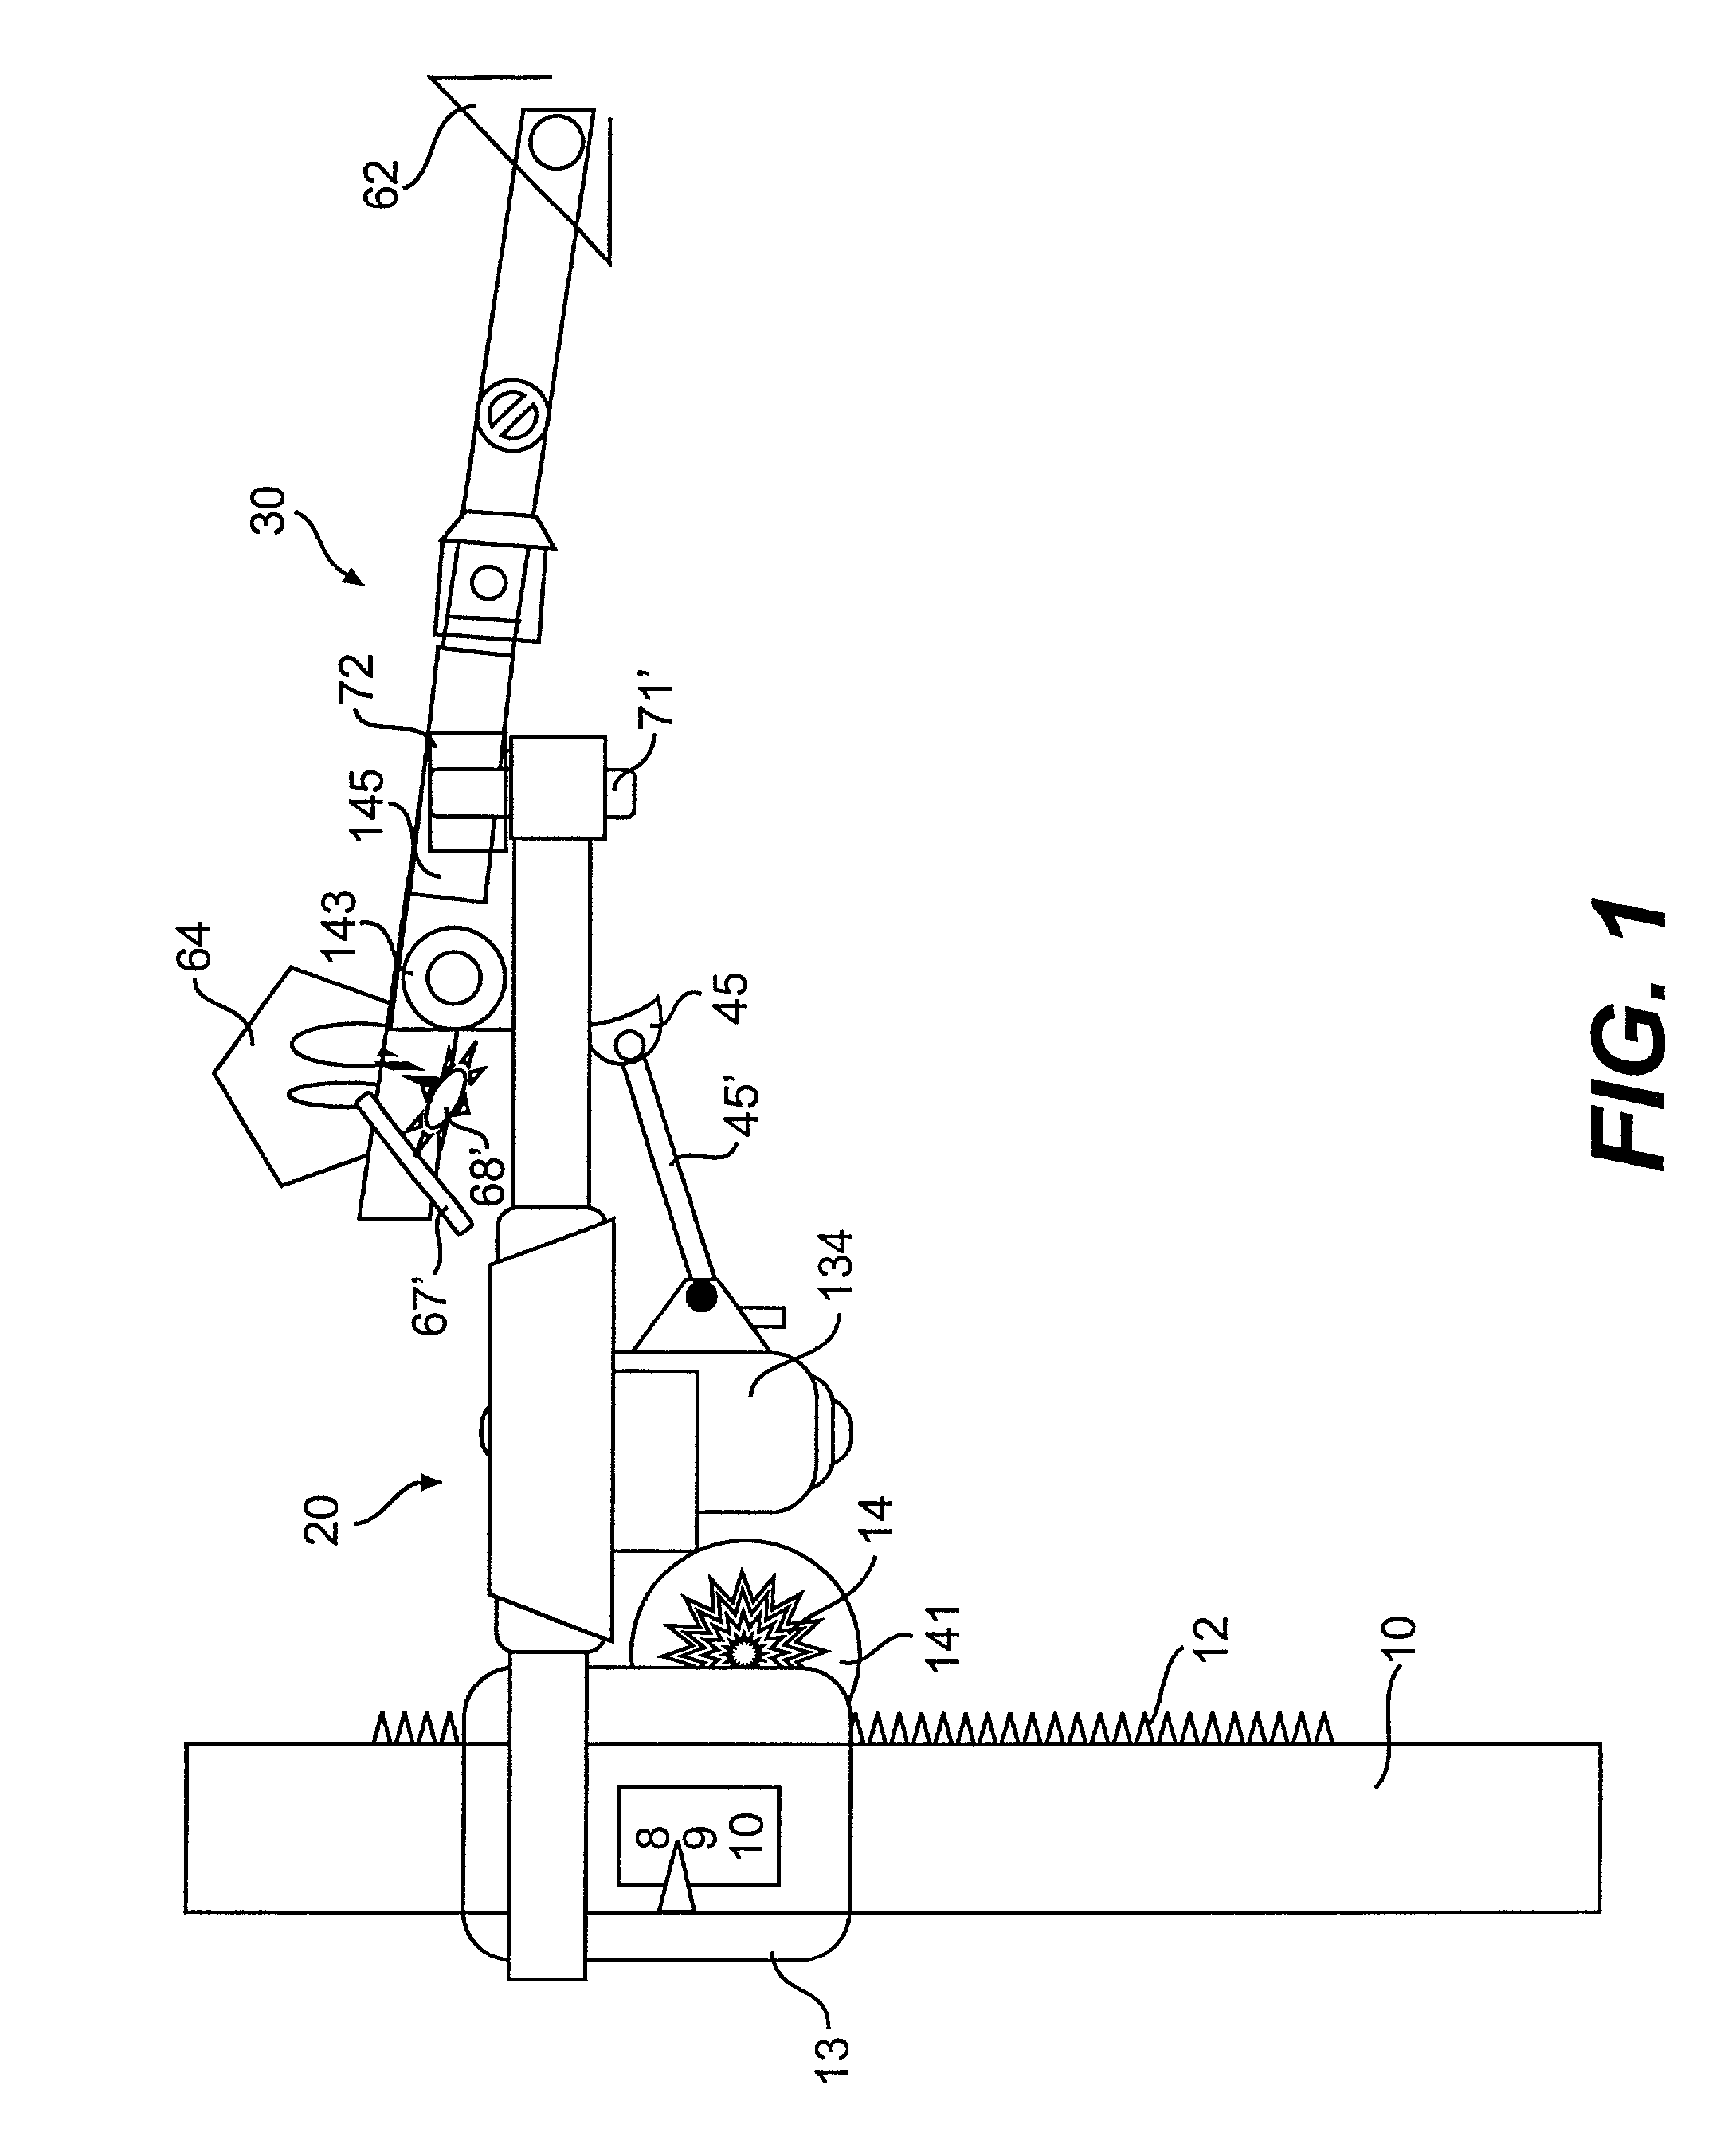 Cervical therapy device